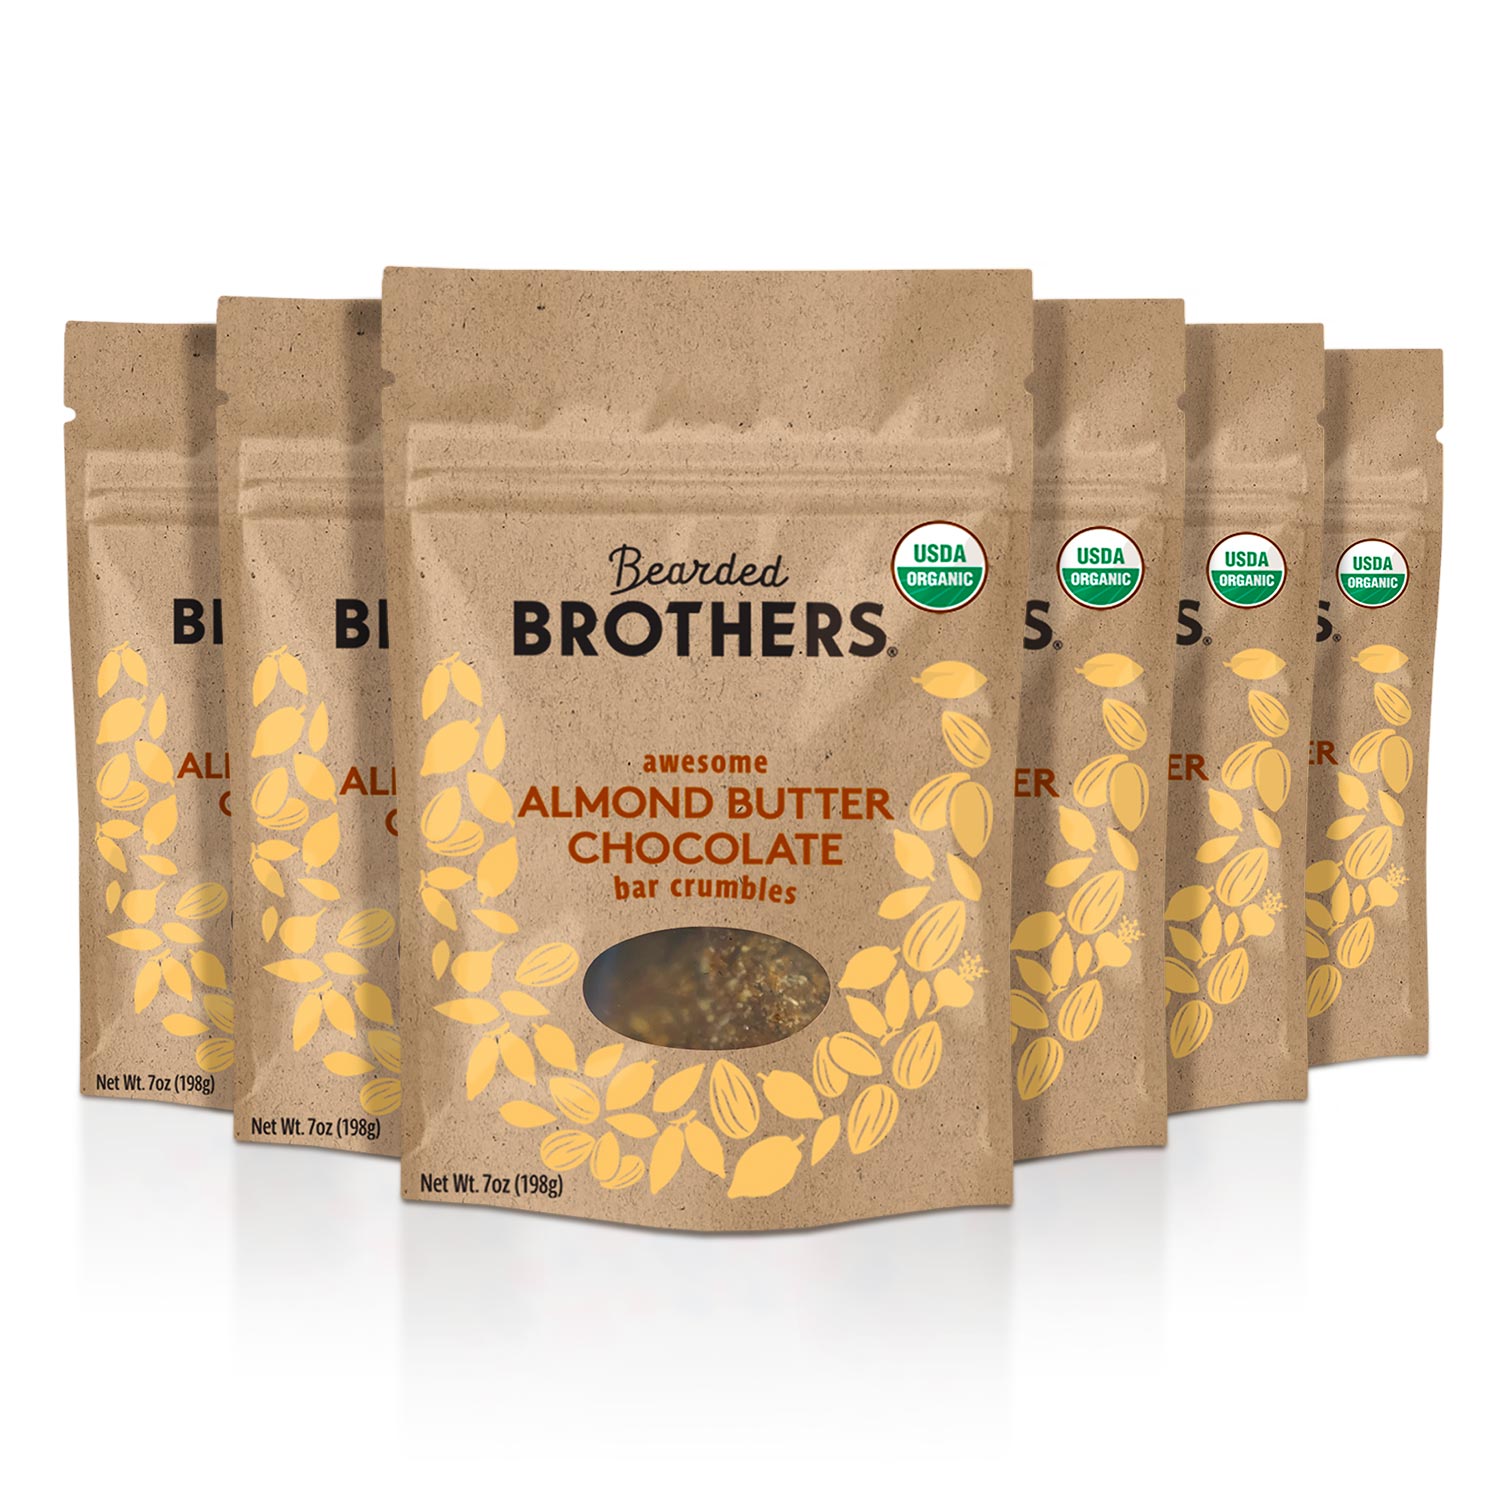 Awesome Almond Butter Chocolate Bar Crumbles (6-Pack)